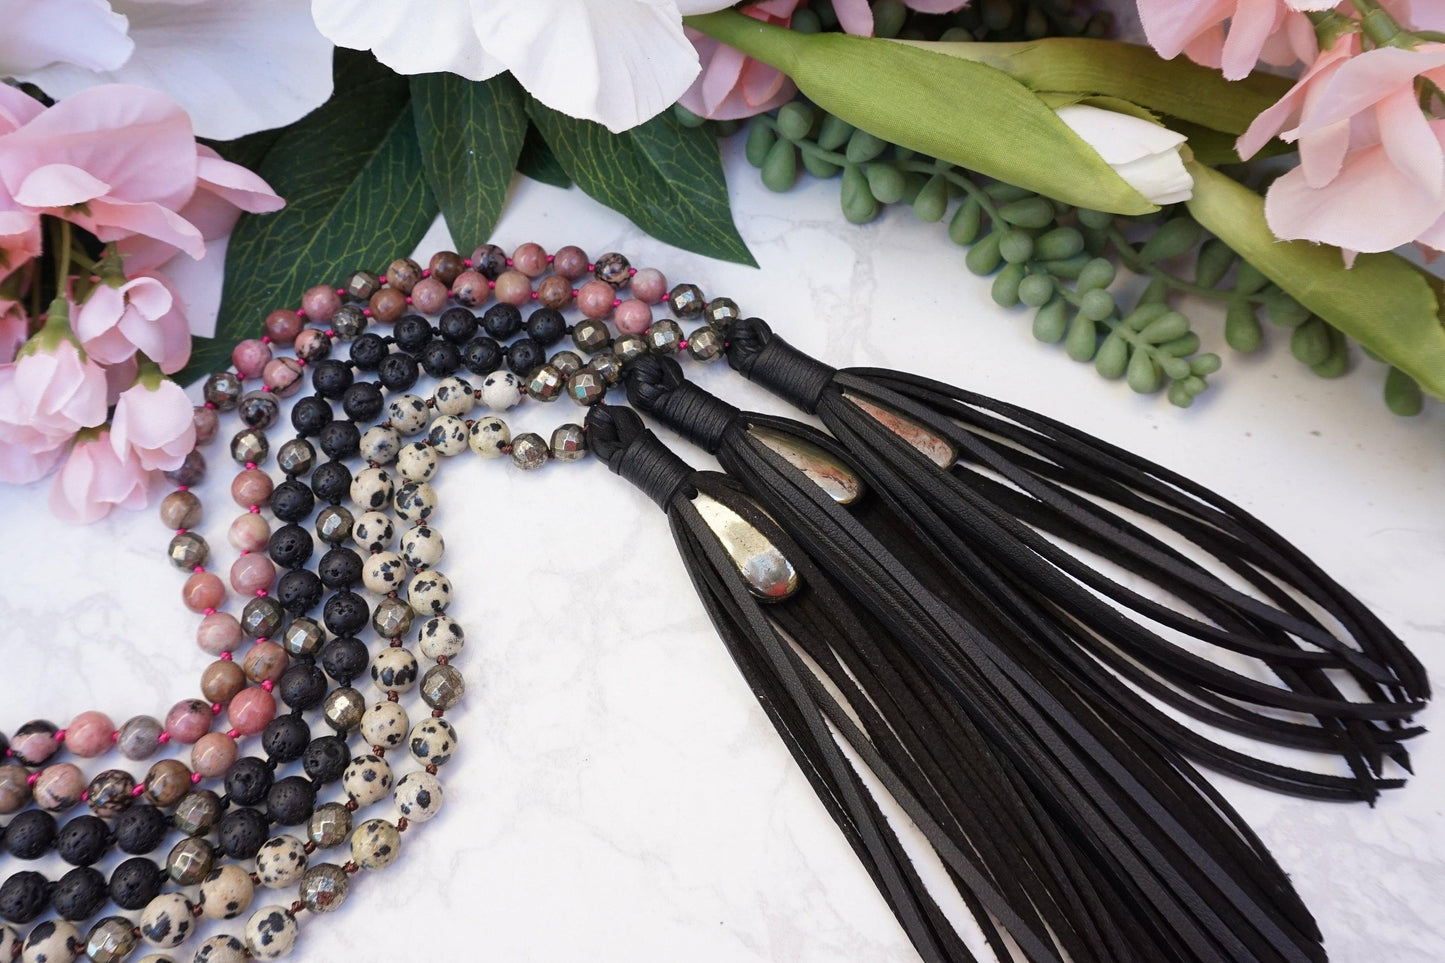 Modern Crystal Mala Necklace featuring natural crysta beads and vegan black faux leather tassels. Pyrite crystal accents that allow you to carry your natural protective crystal energies with style.